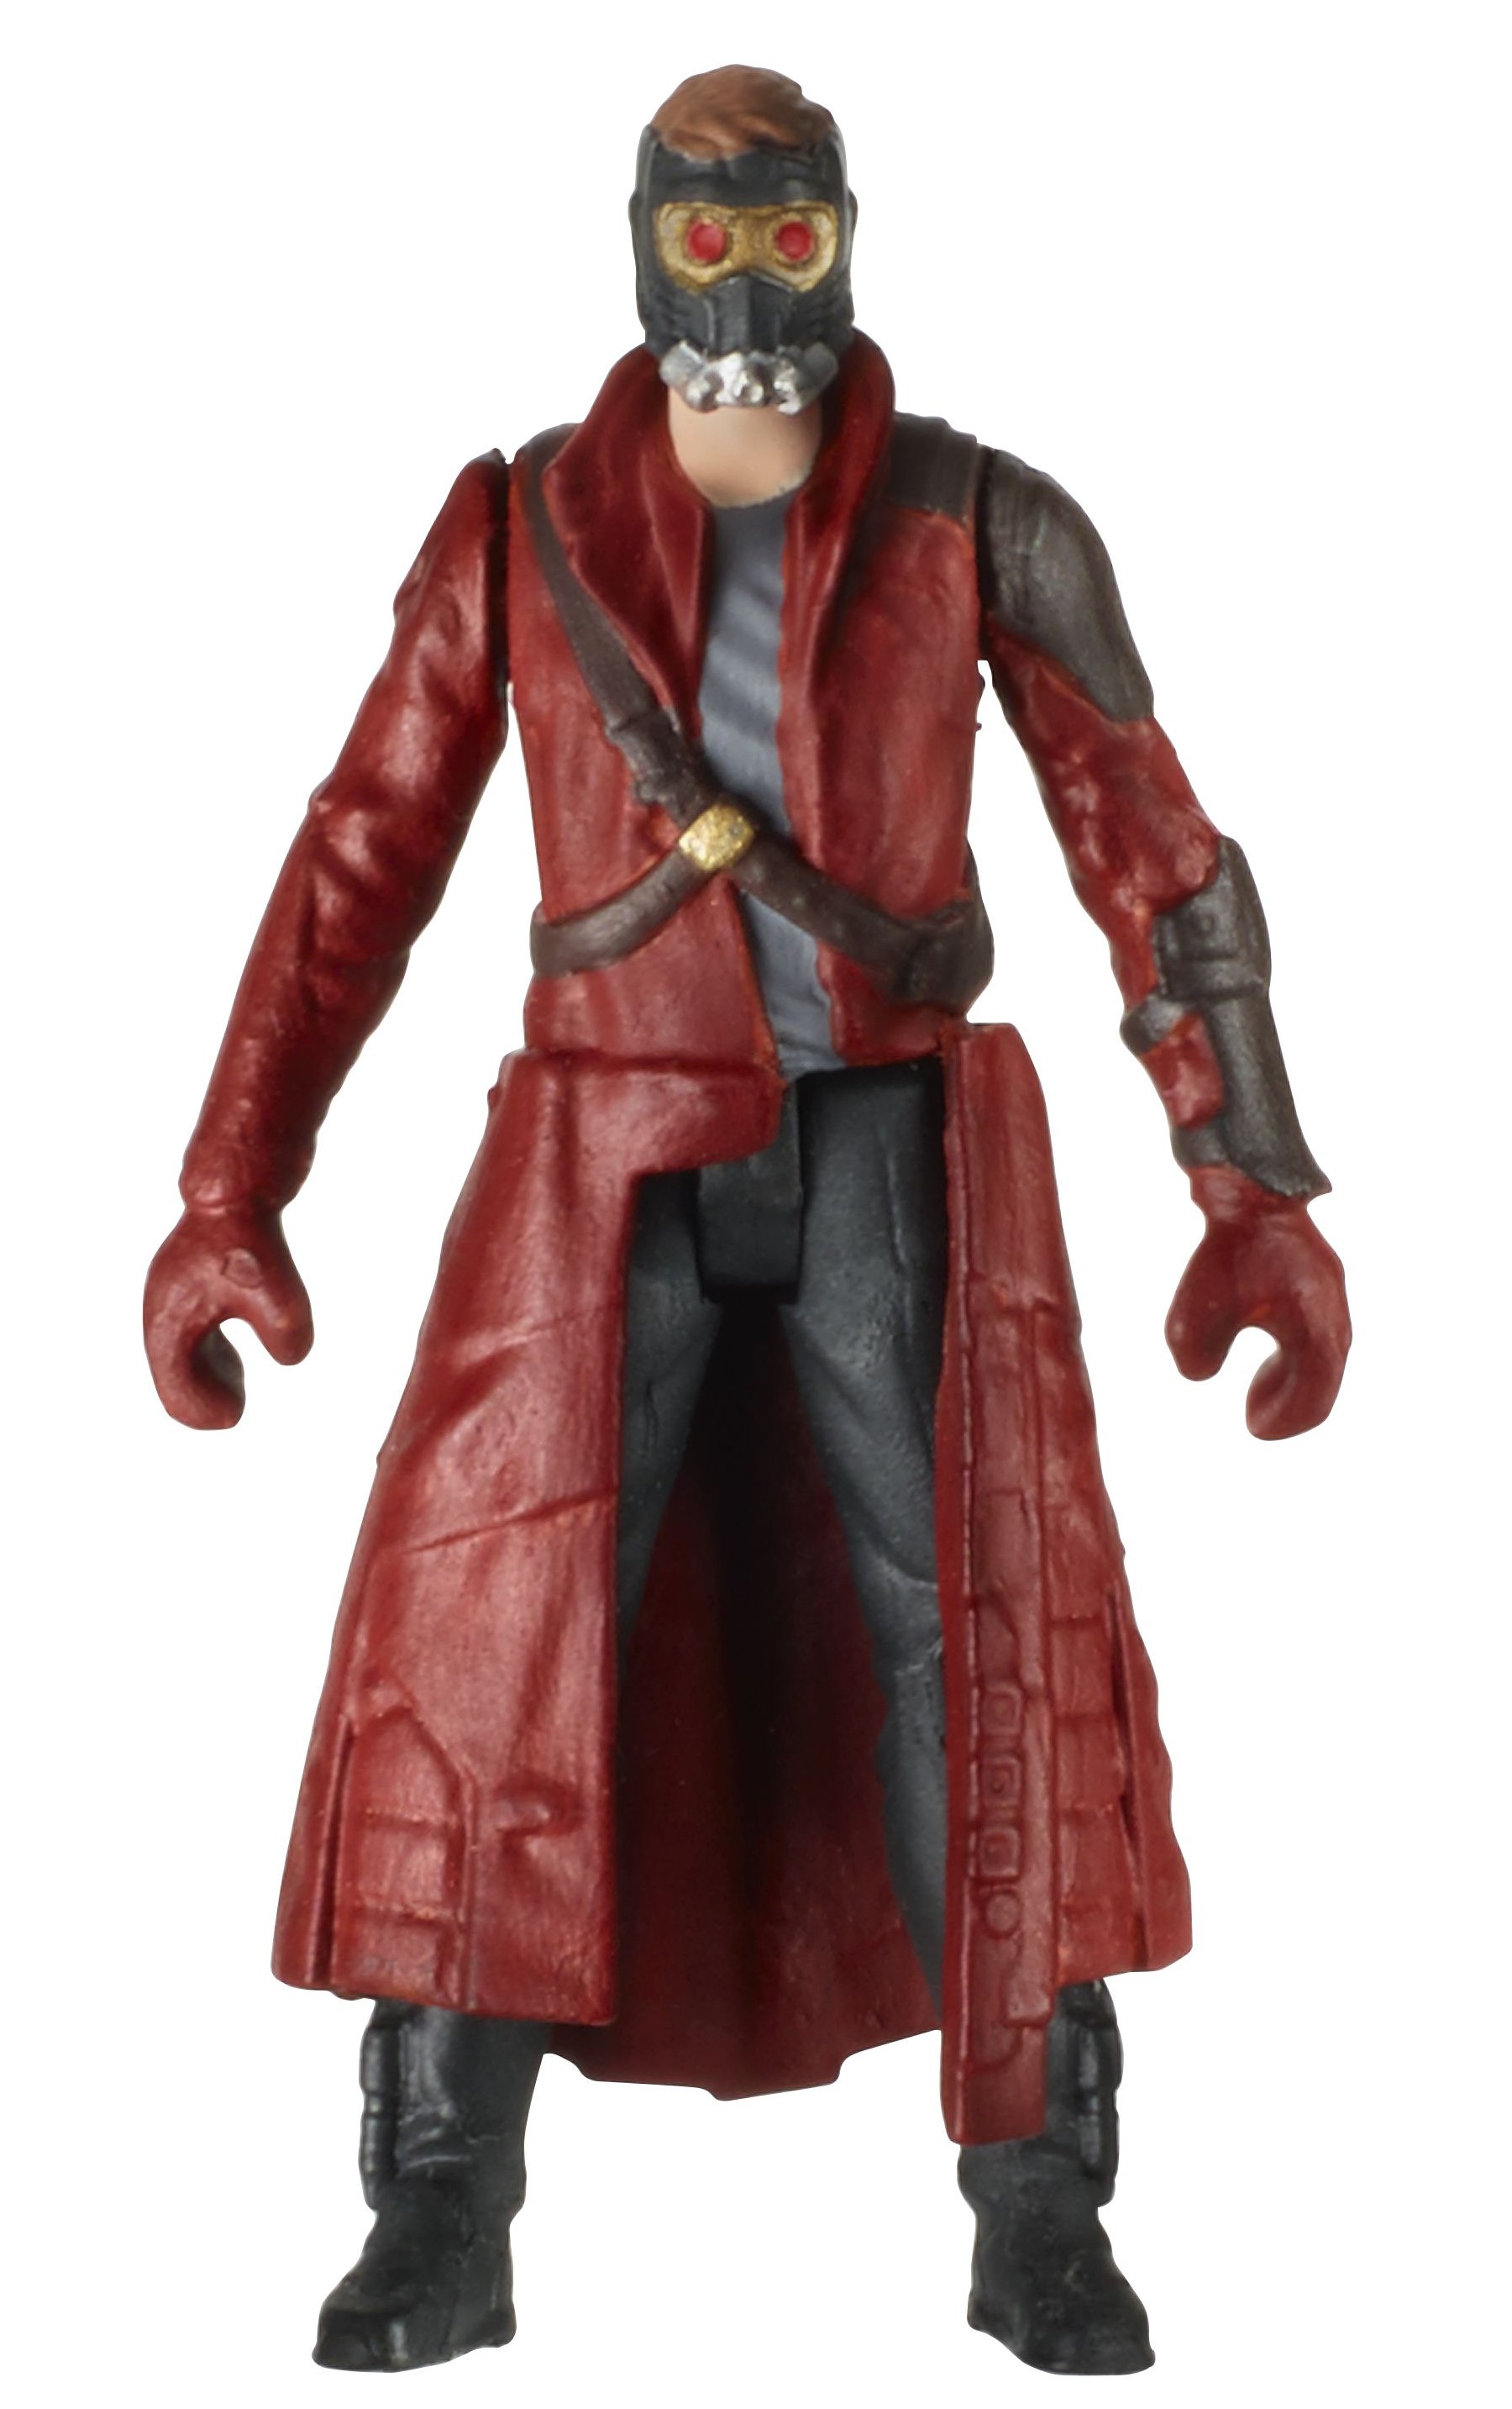 HASBRO MARVEL Quill Star Lord FROM GUARDIANS OF THE GALAXY 2014 5" 